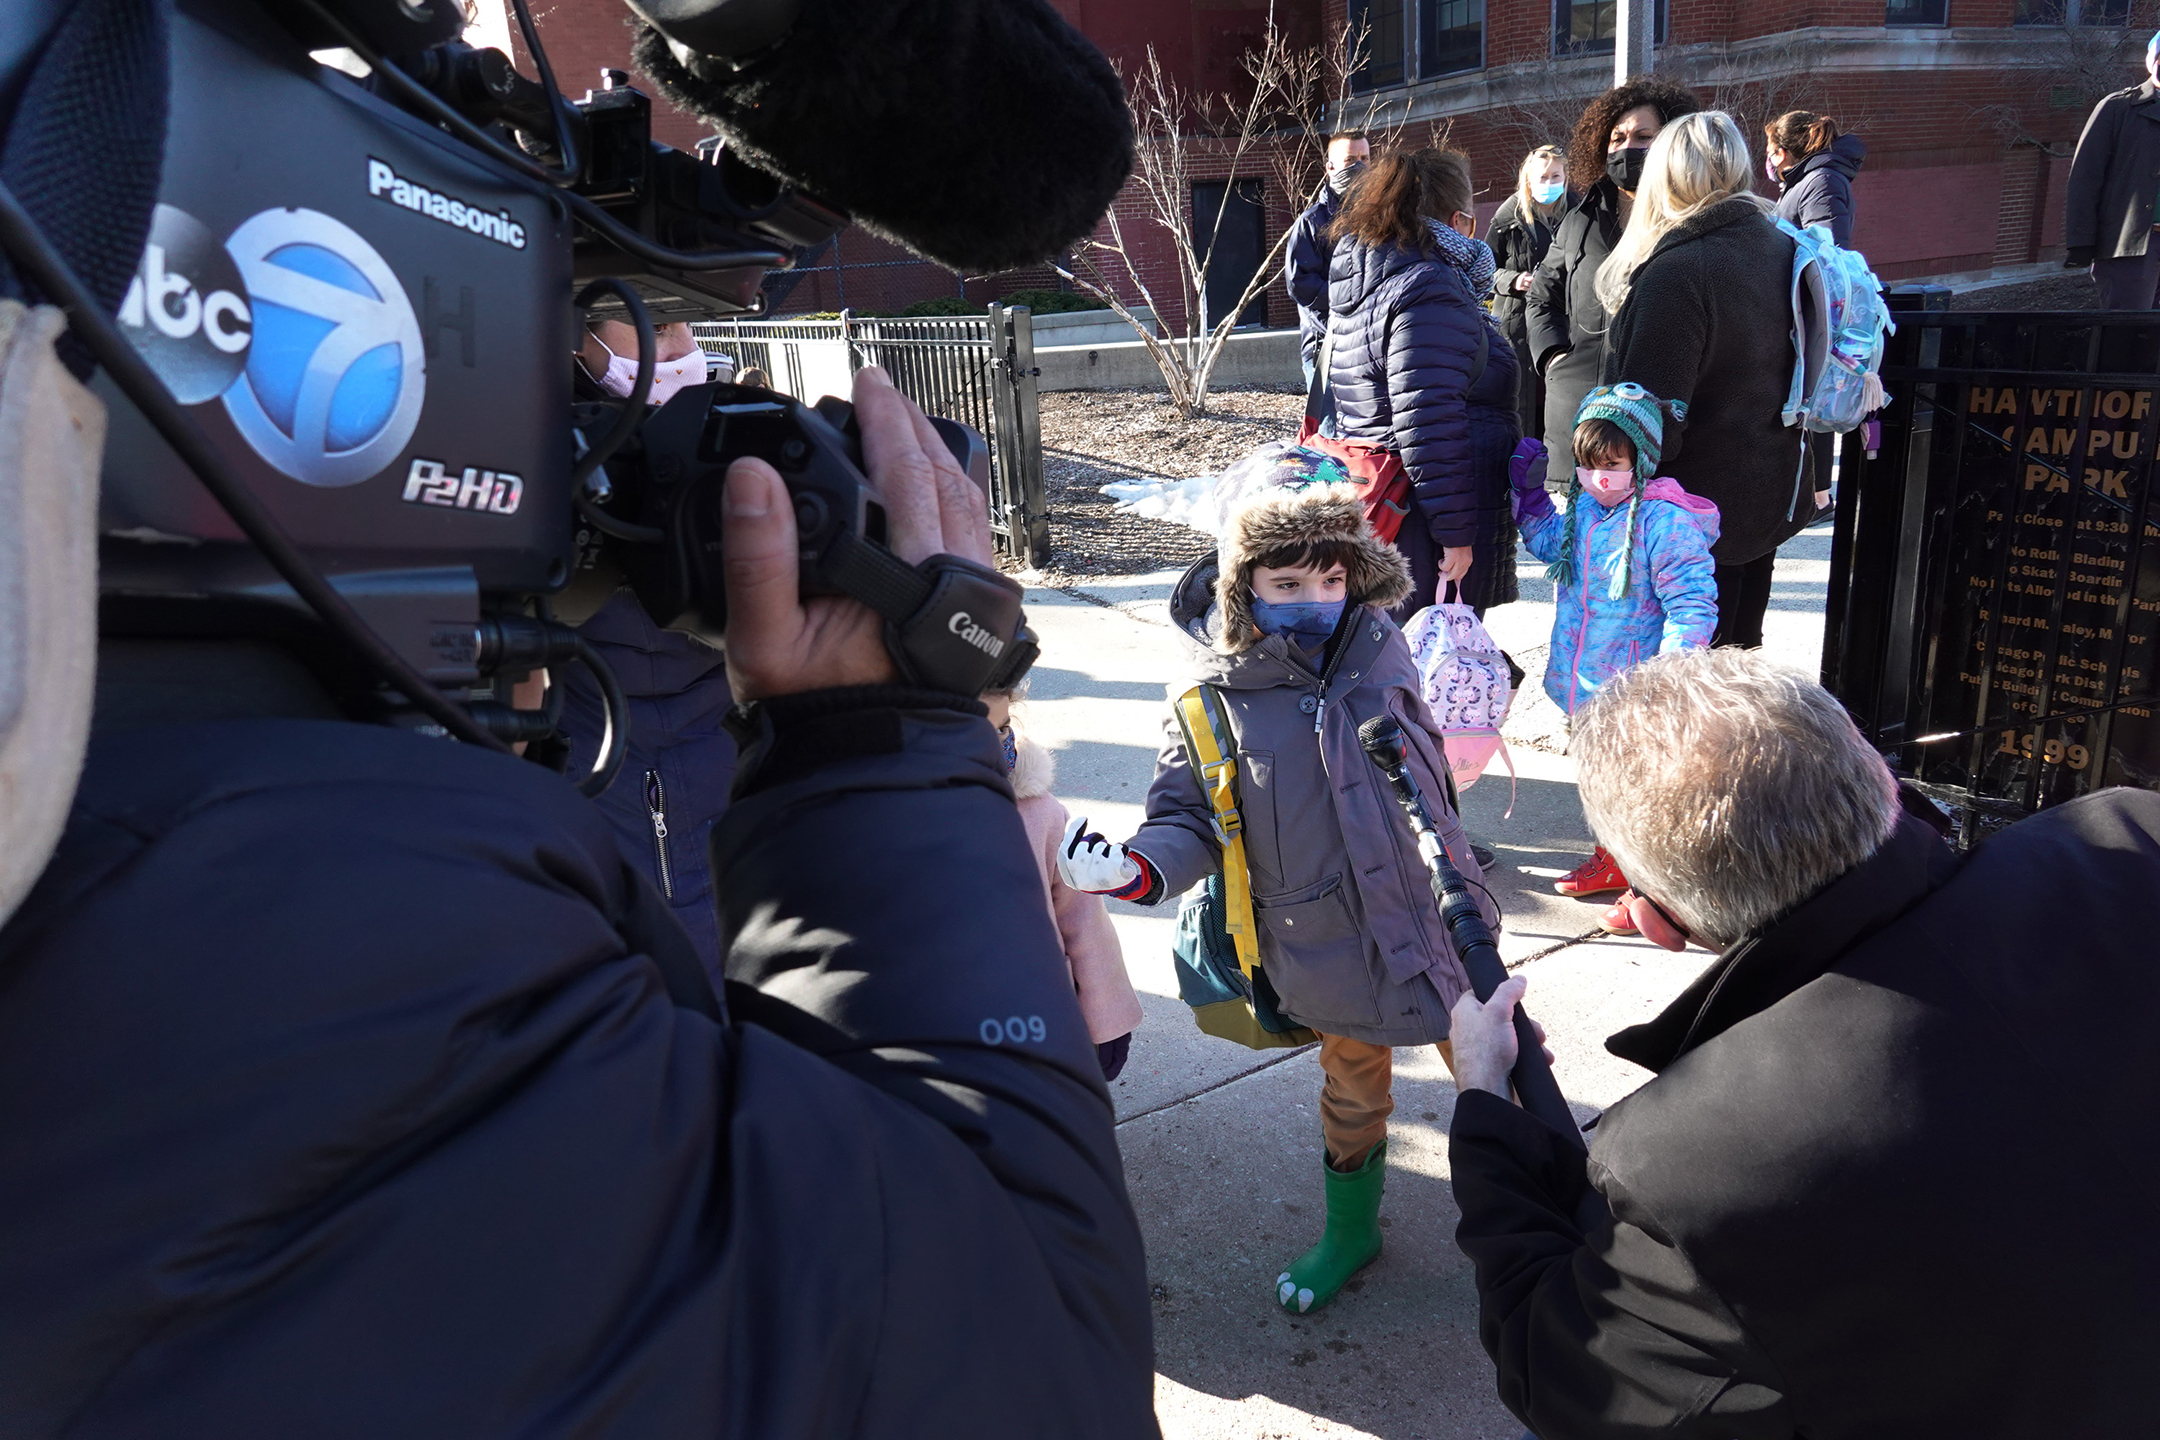 Children are interviewed by a television news reporter